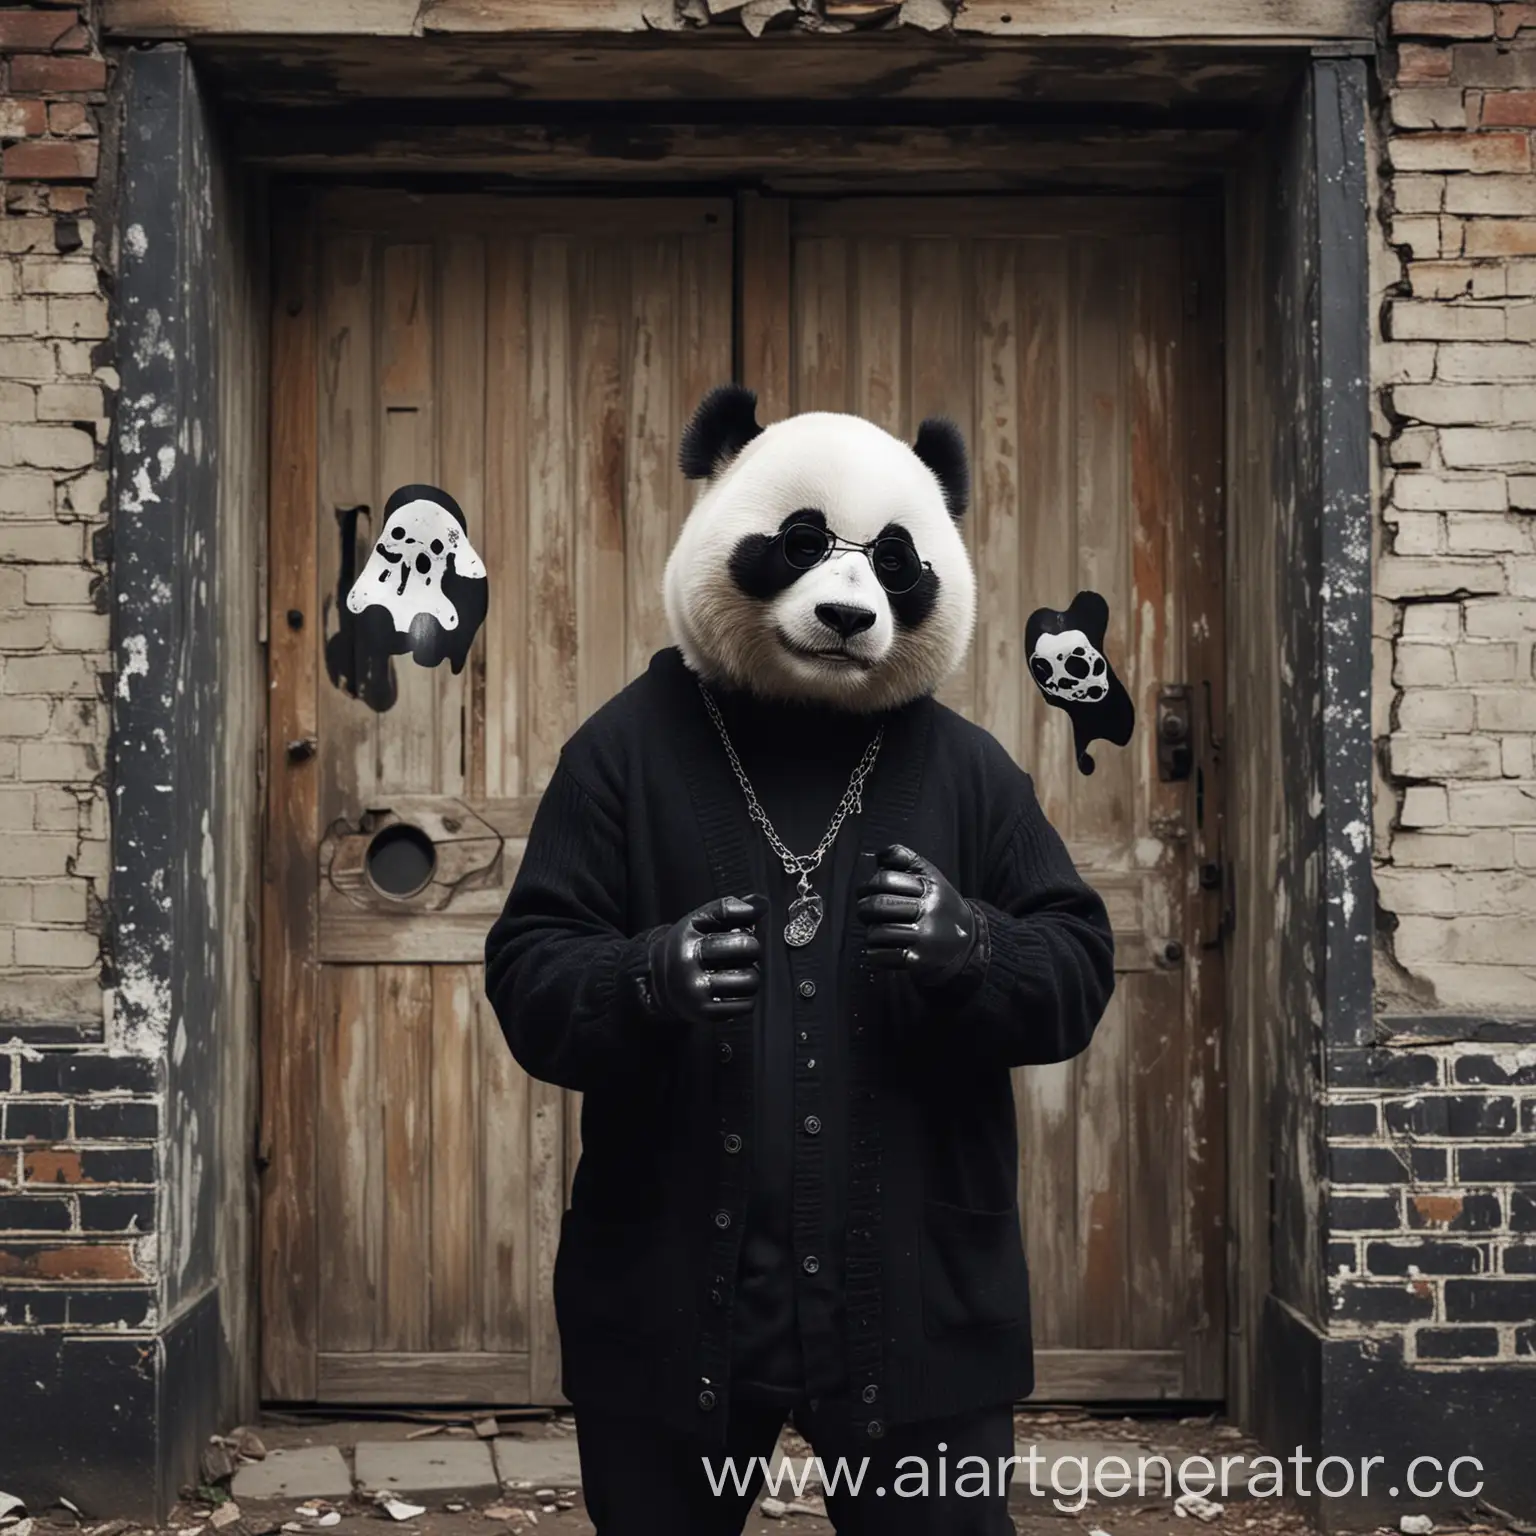 Stylish-Panda-Holding-Ghost-and-Knuckle-Duster-in-Vintage-Building